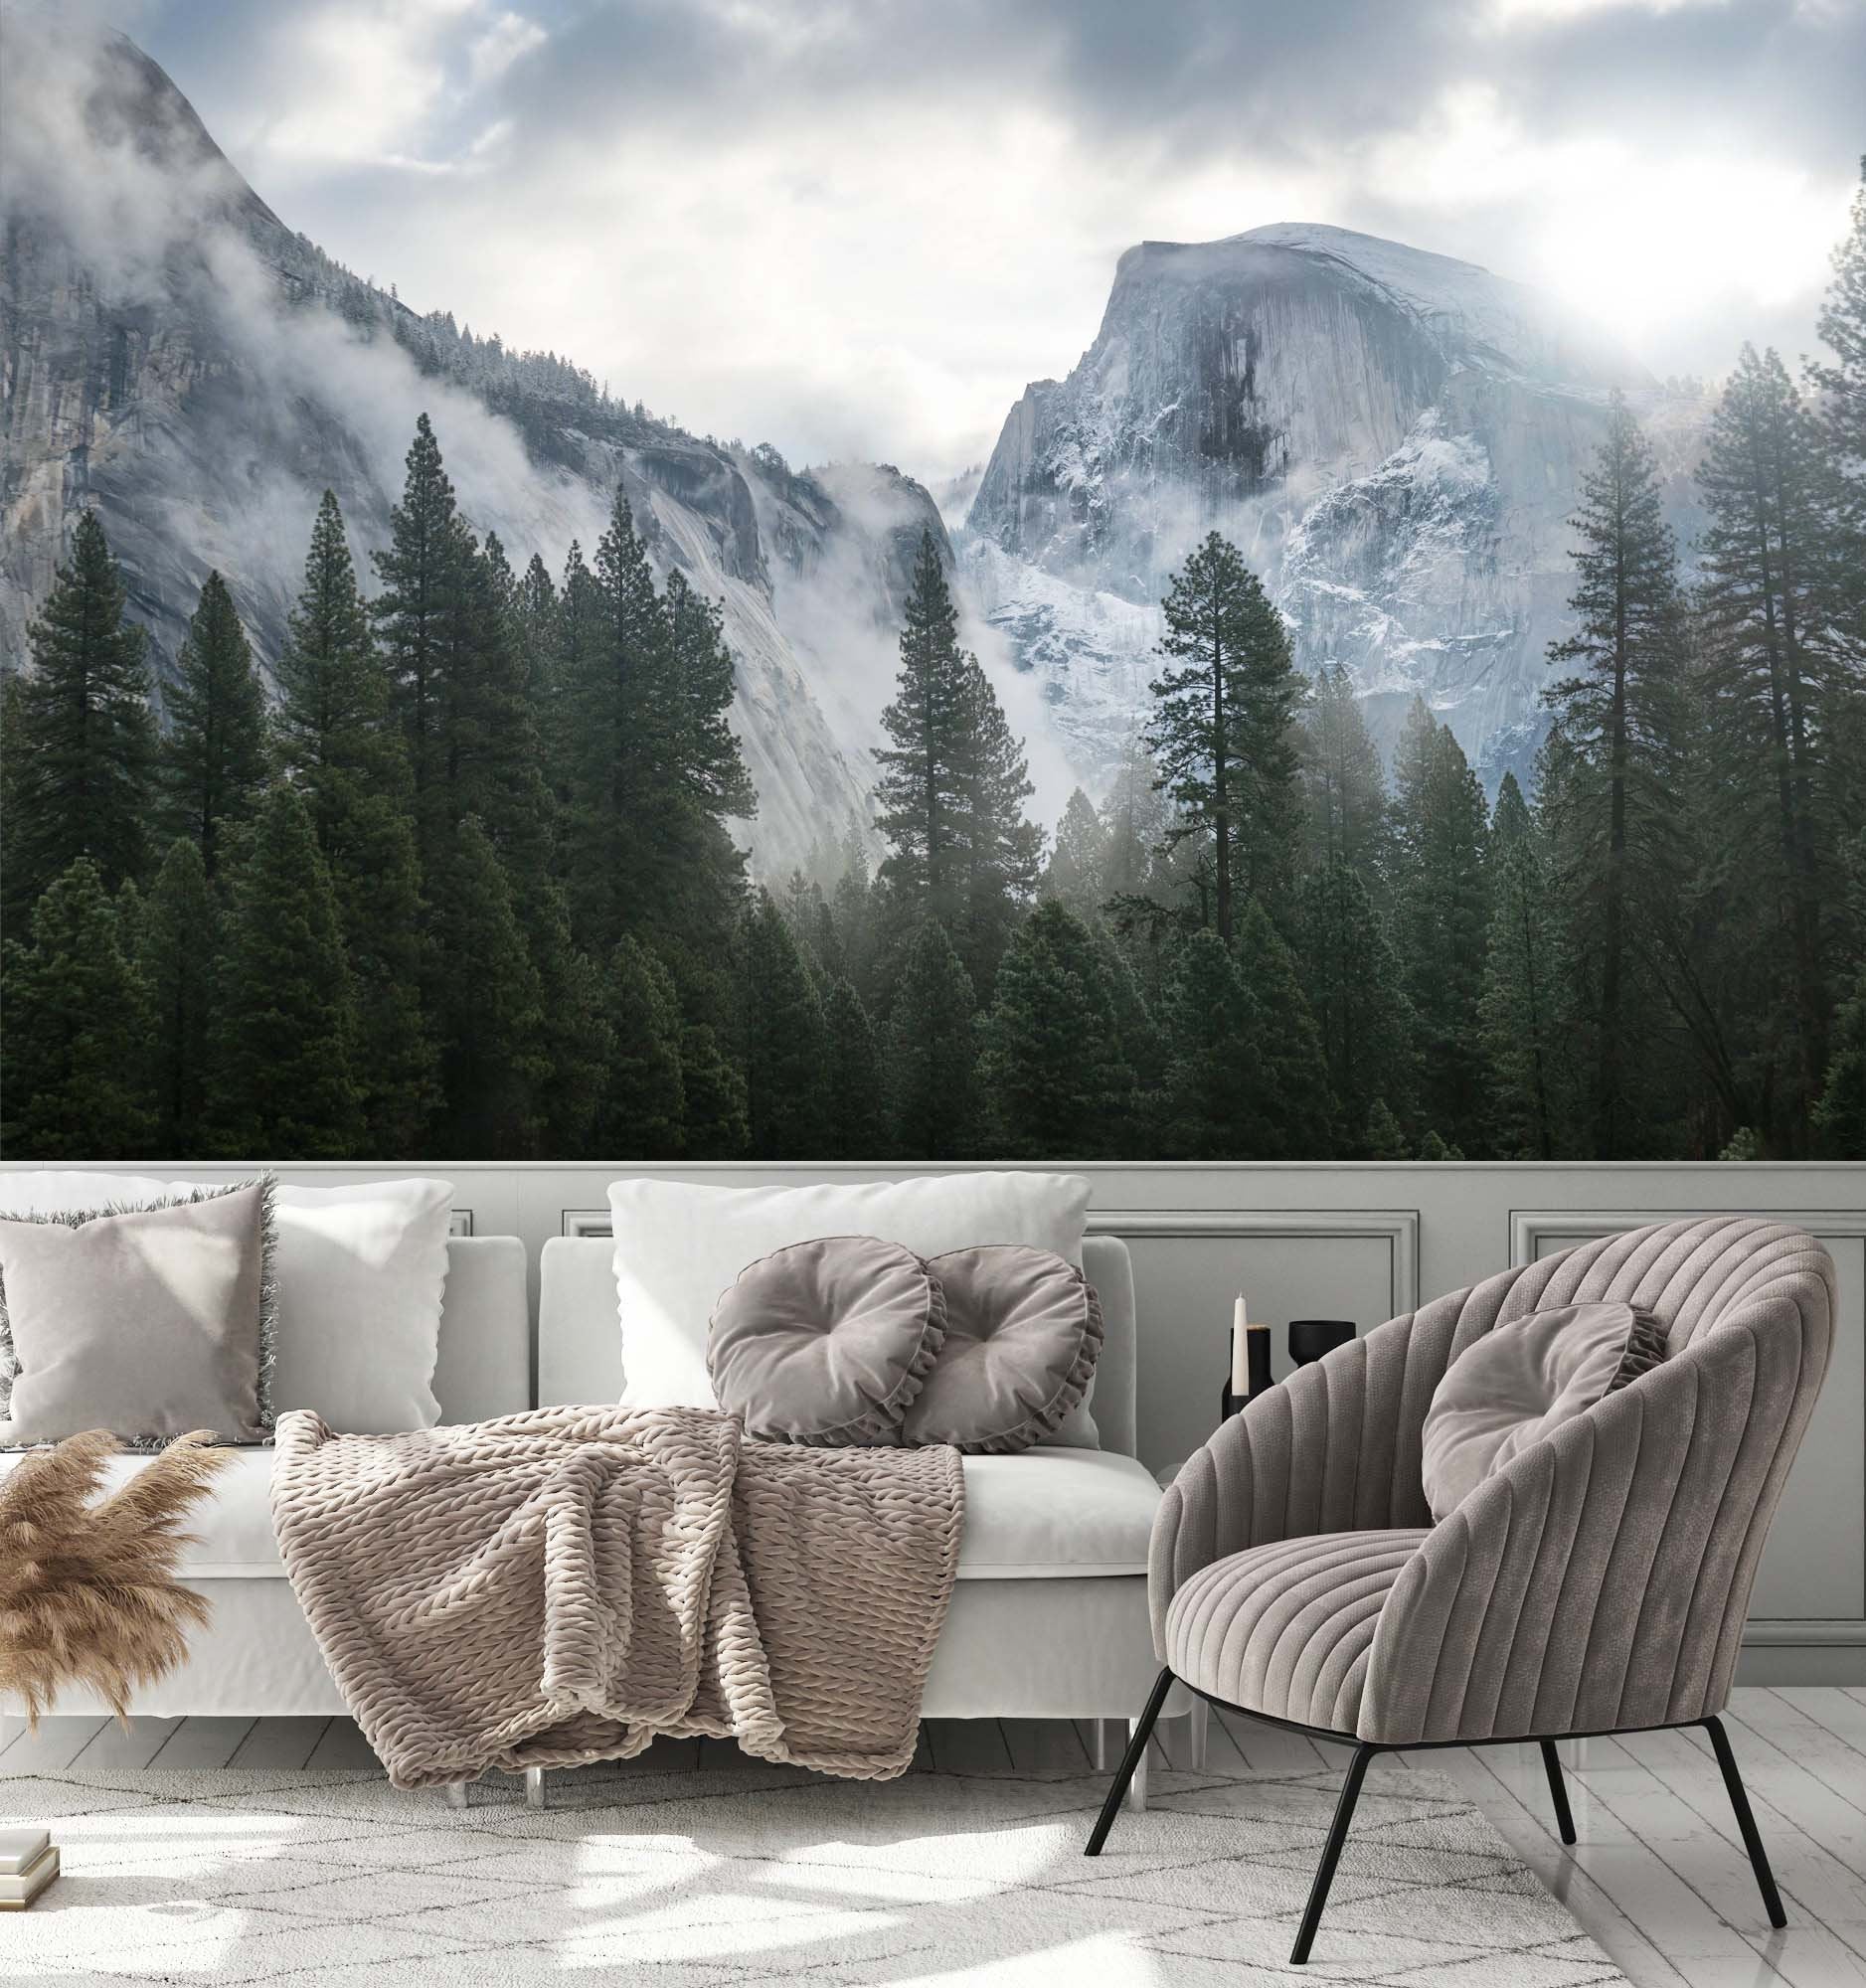 Misty Snowy Mountain Forest Landscape Nature Wallpaper Cafe Restaurant Decoration Living Room Bedroom Wall Covering Mural Home Decor Art